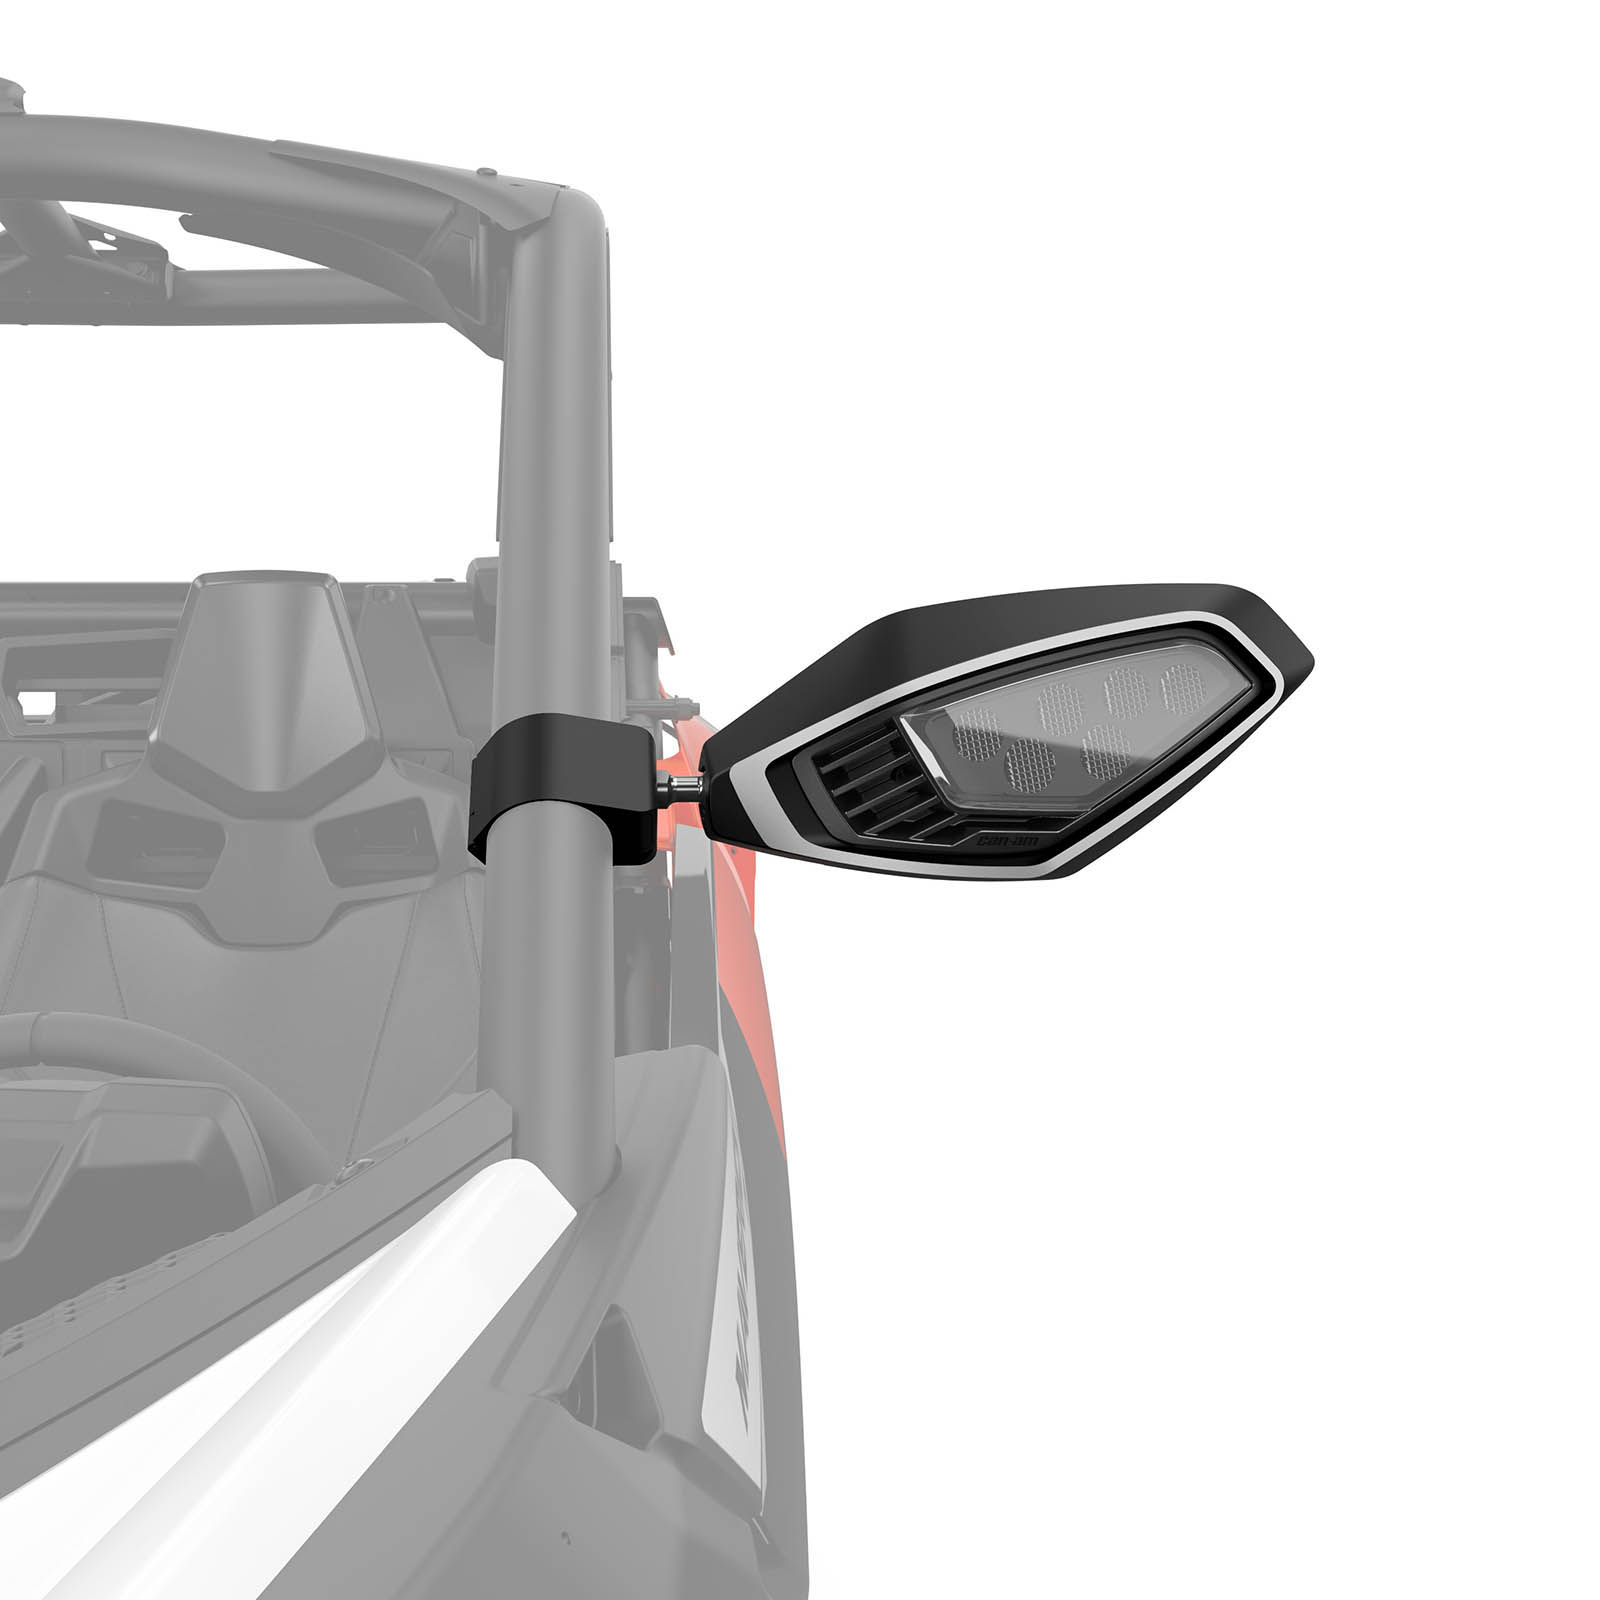 Integrated LED Side Mirror Lights for Can-Am Side-by-Side vehicles